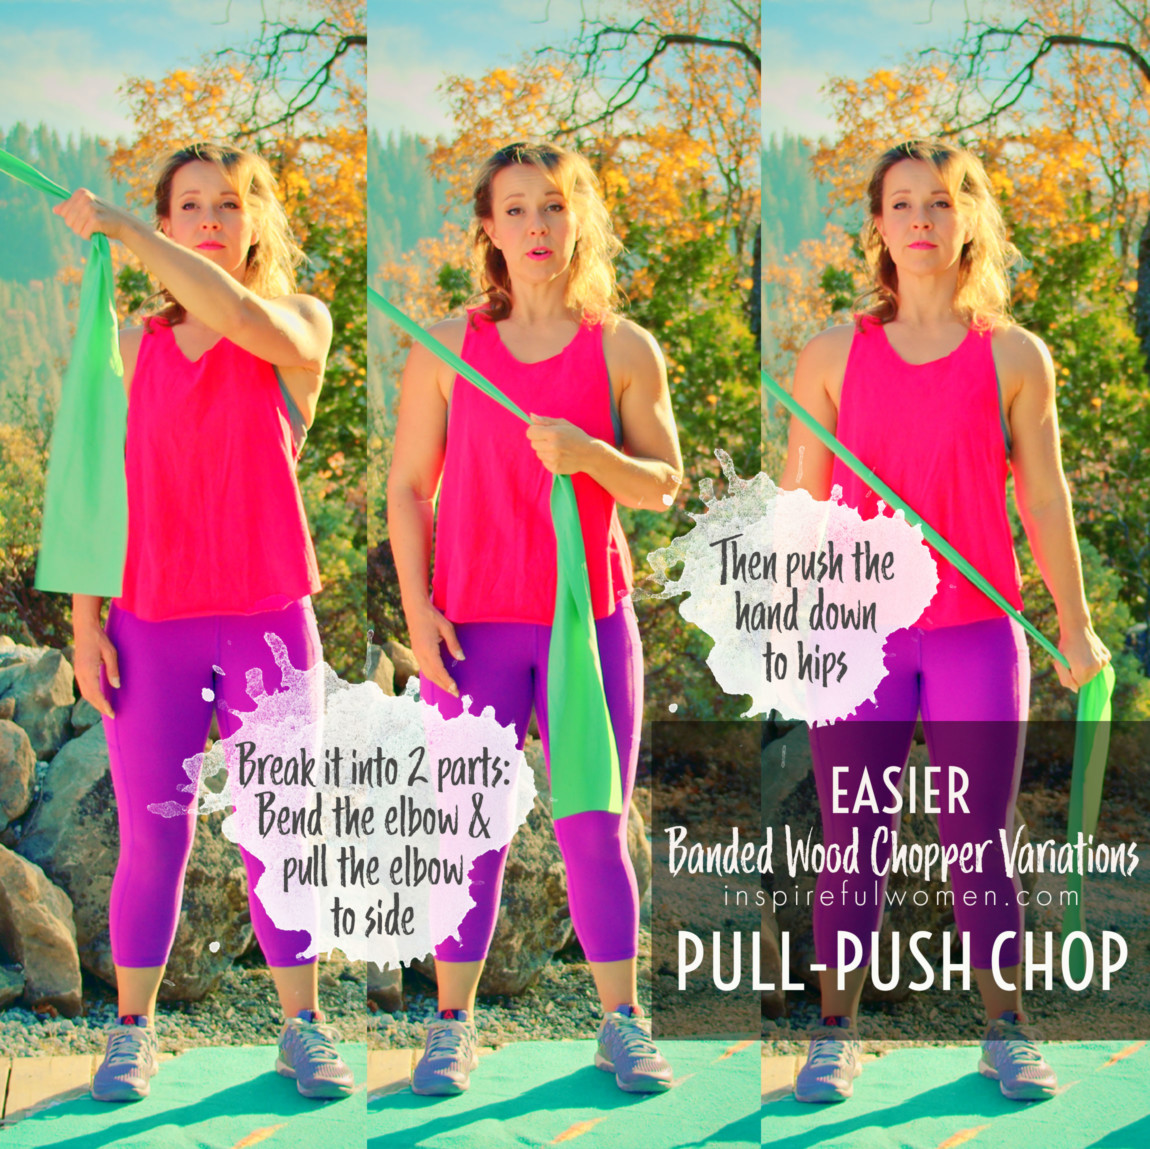 pull-push-chop-banded-wood-chops-obliques-exercise-easier